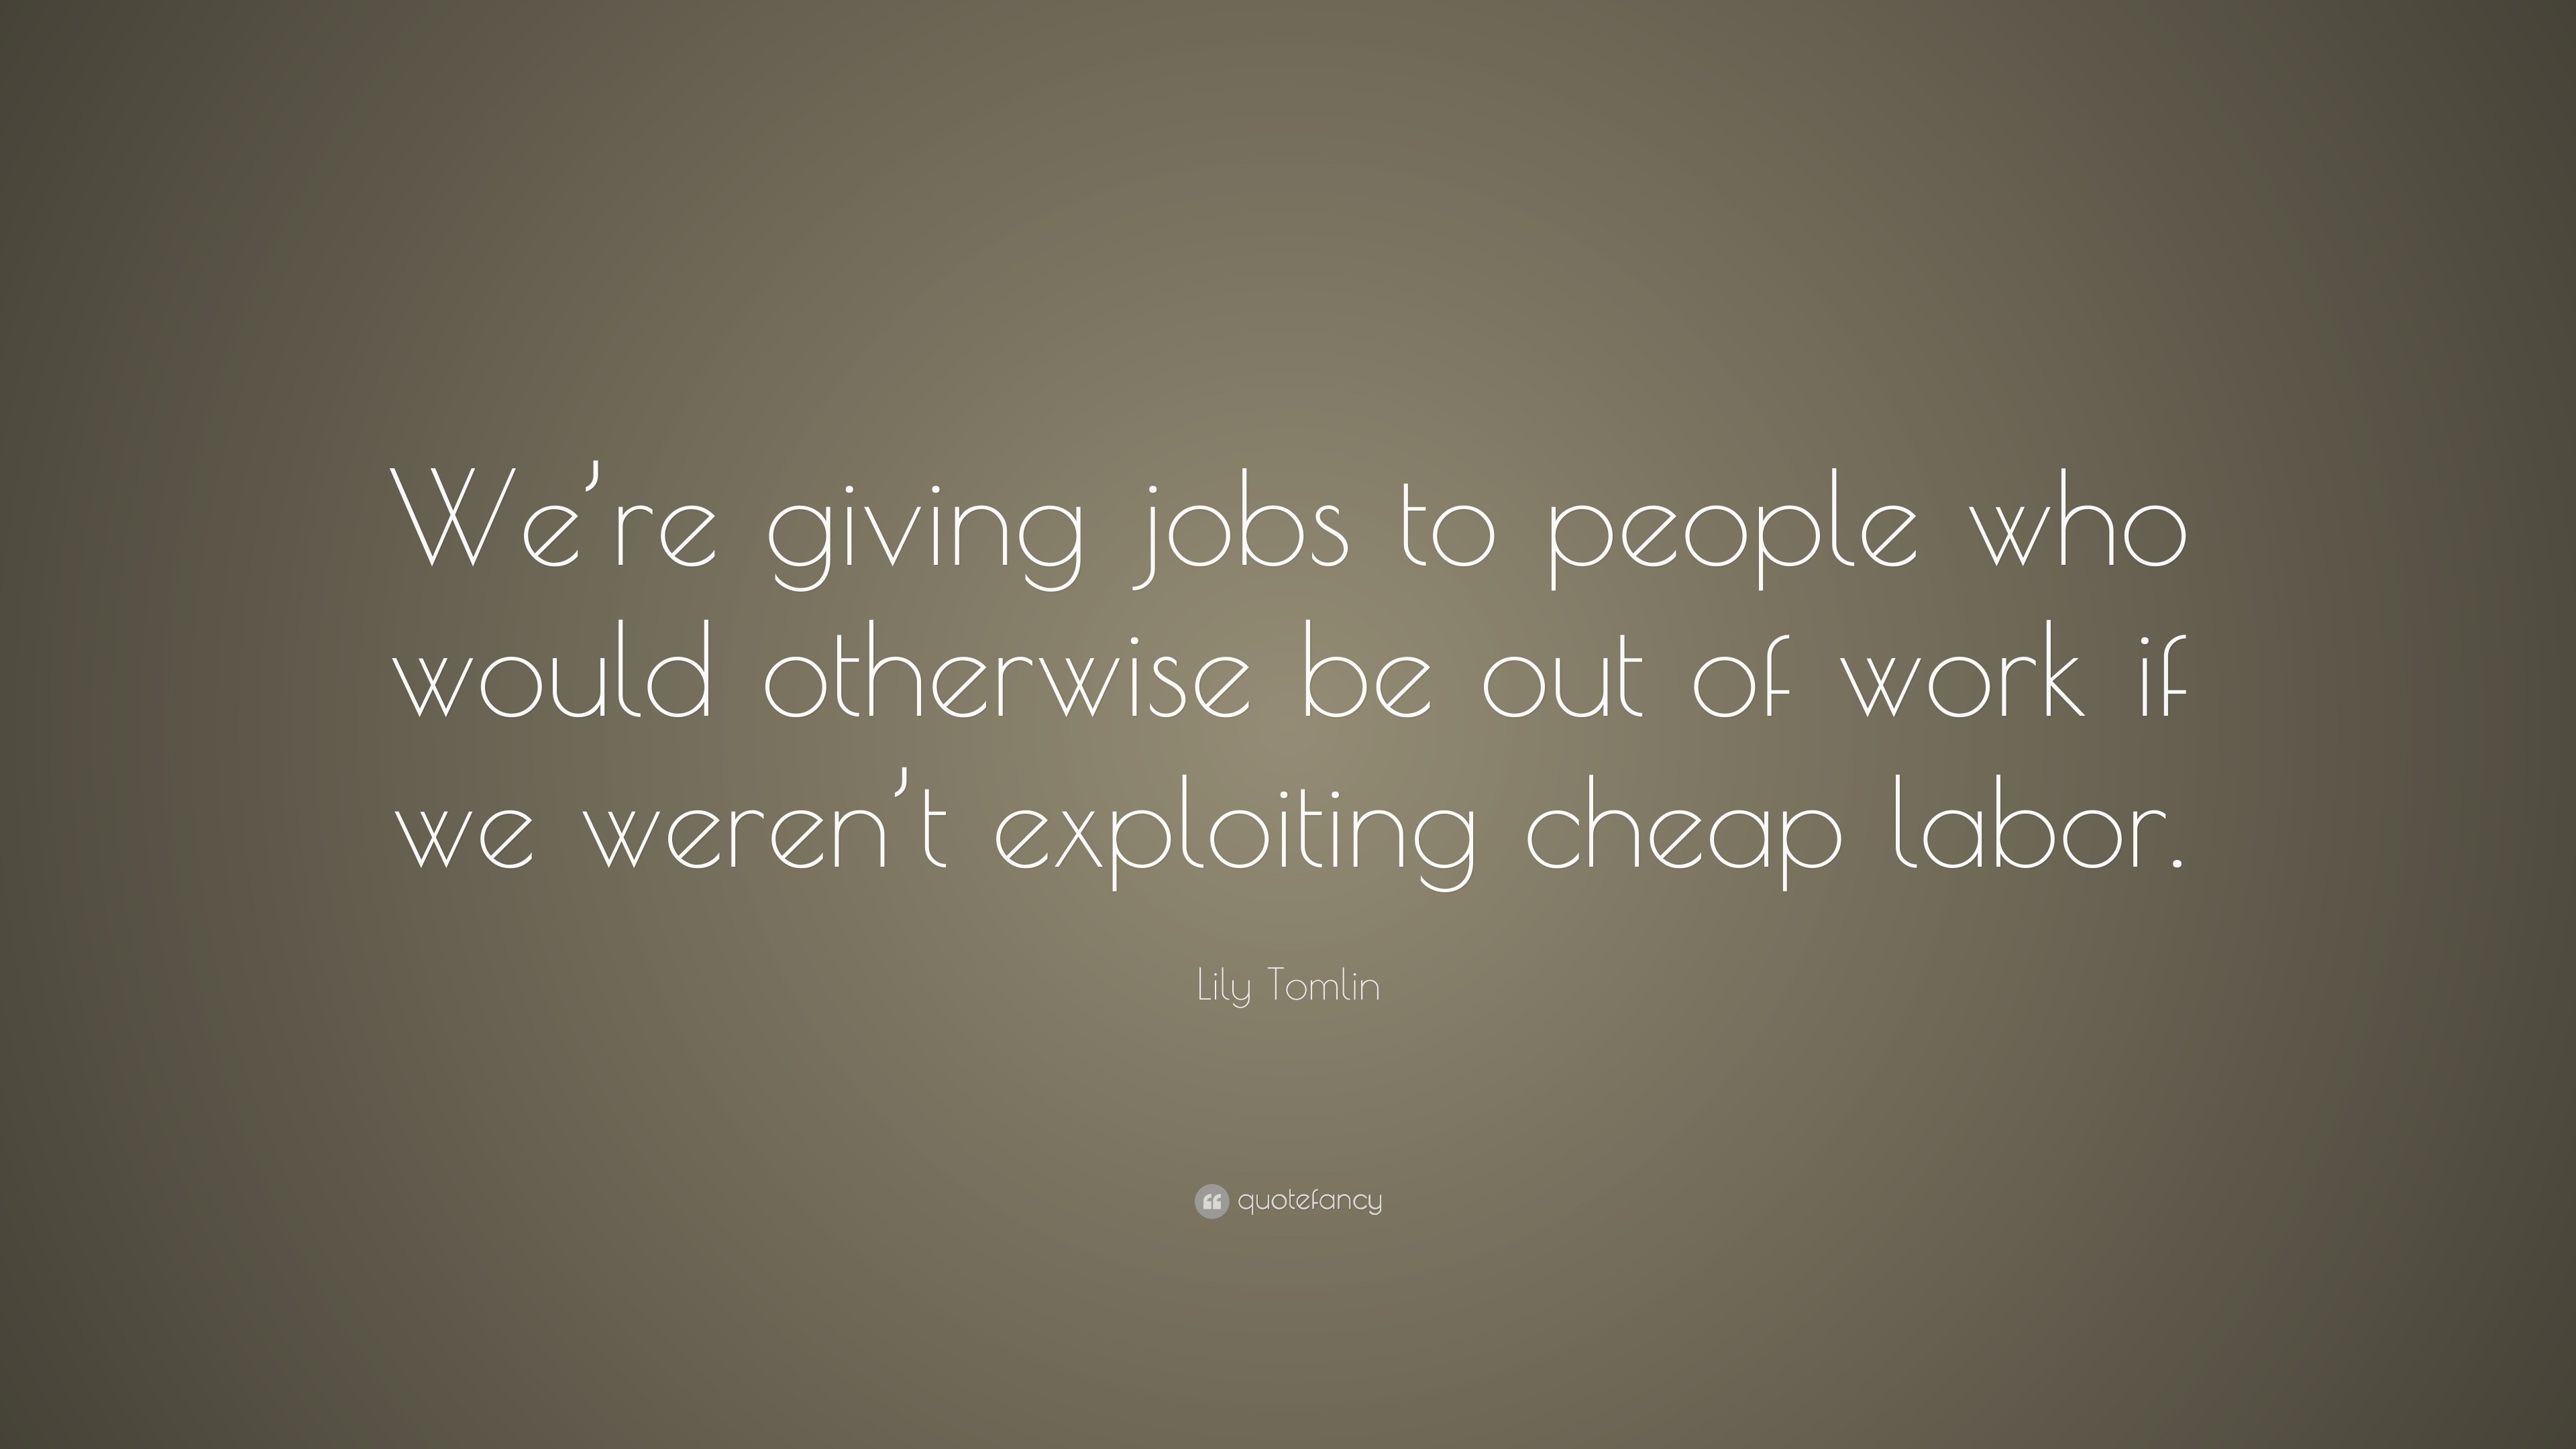 Lily Tomlin Quote: “We’re giving jobs to people who would otherwise be ...